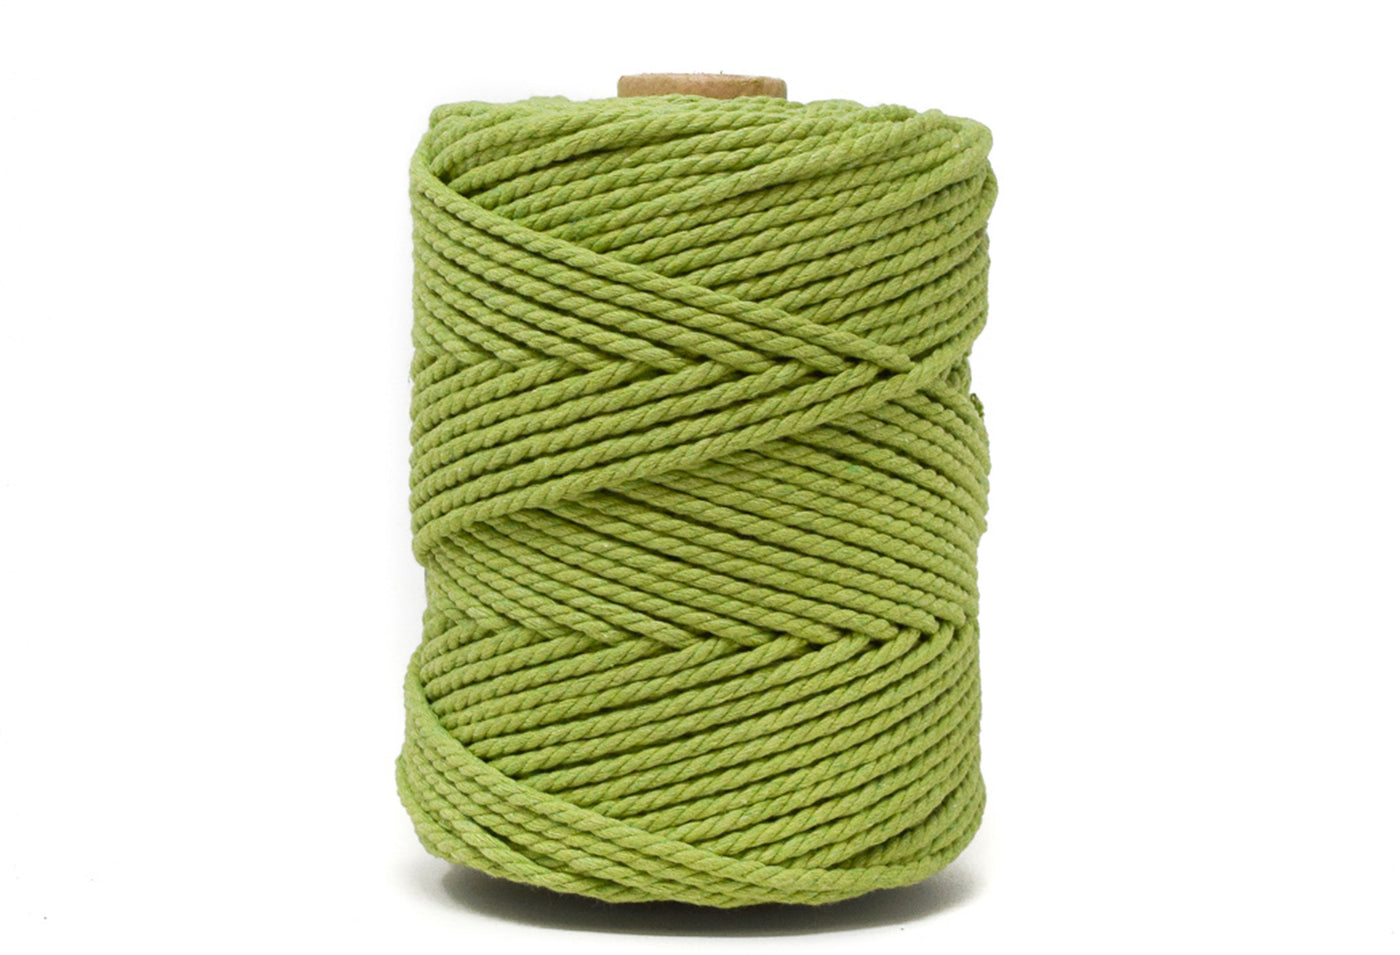 COTTON ROPE ZERO WASTE 3 MM - 3 PLY - APPLE GREEN COLOR